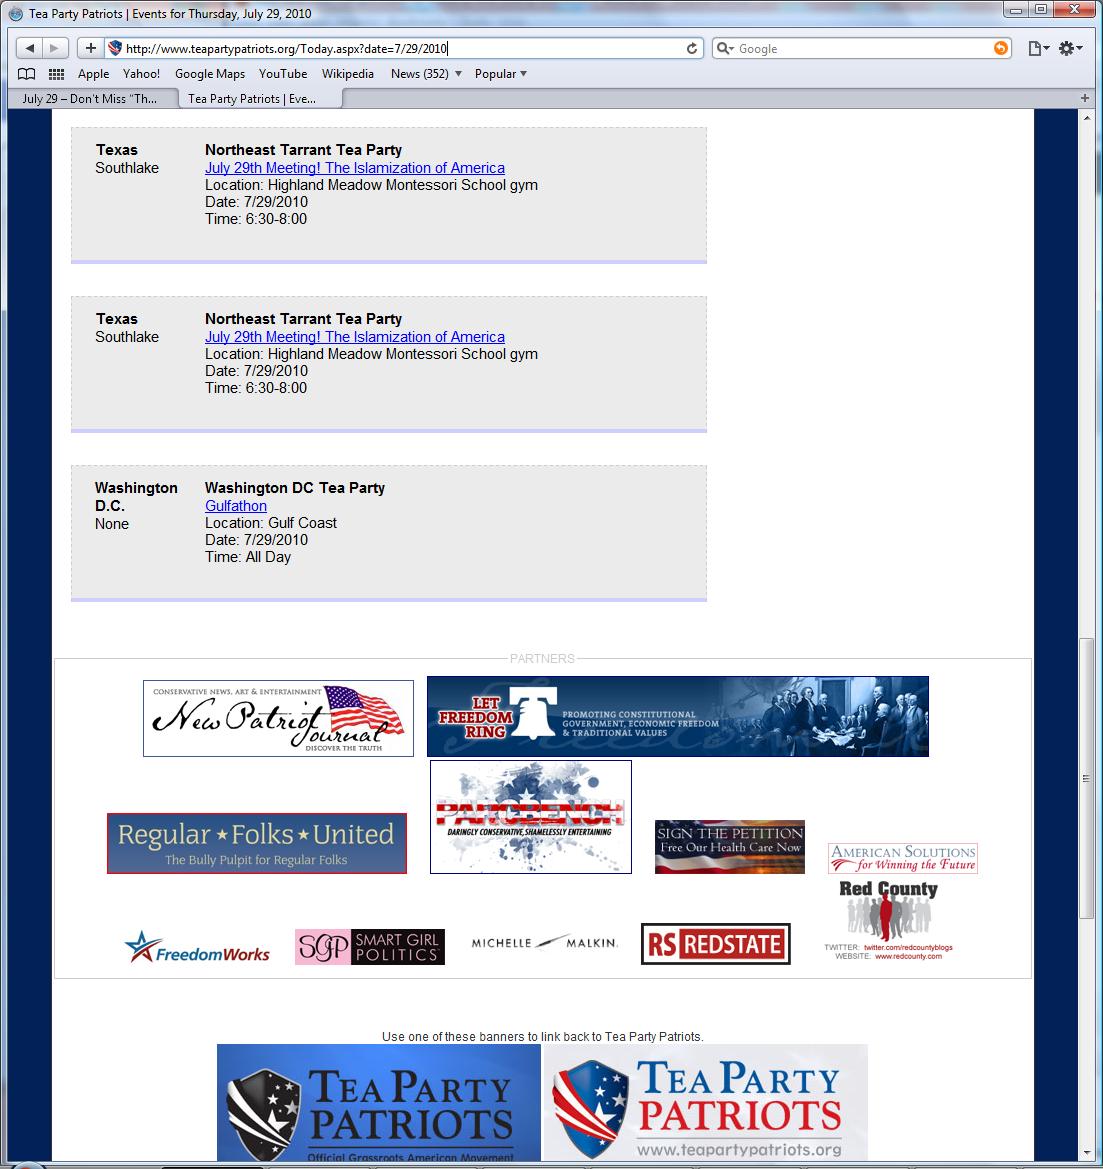 National Tea Party Patriots July 29 Event Shows National Promotion of "Islamization of America" Tea Party Event (Screenshot: Tea Party Patriots Web Site)